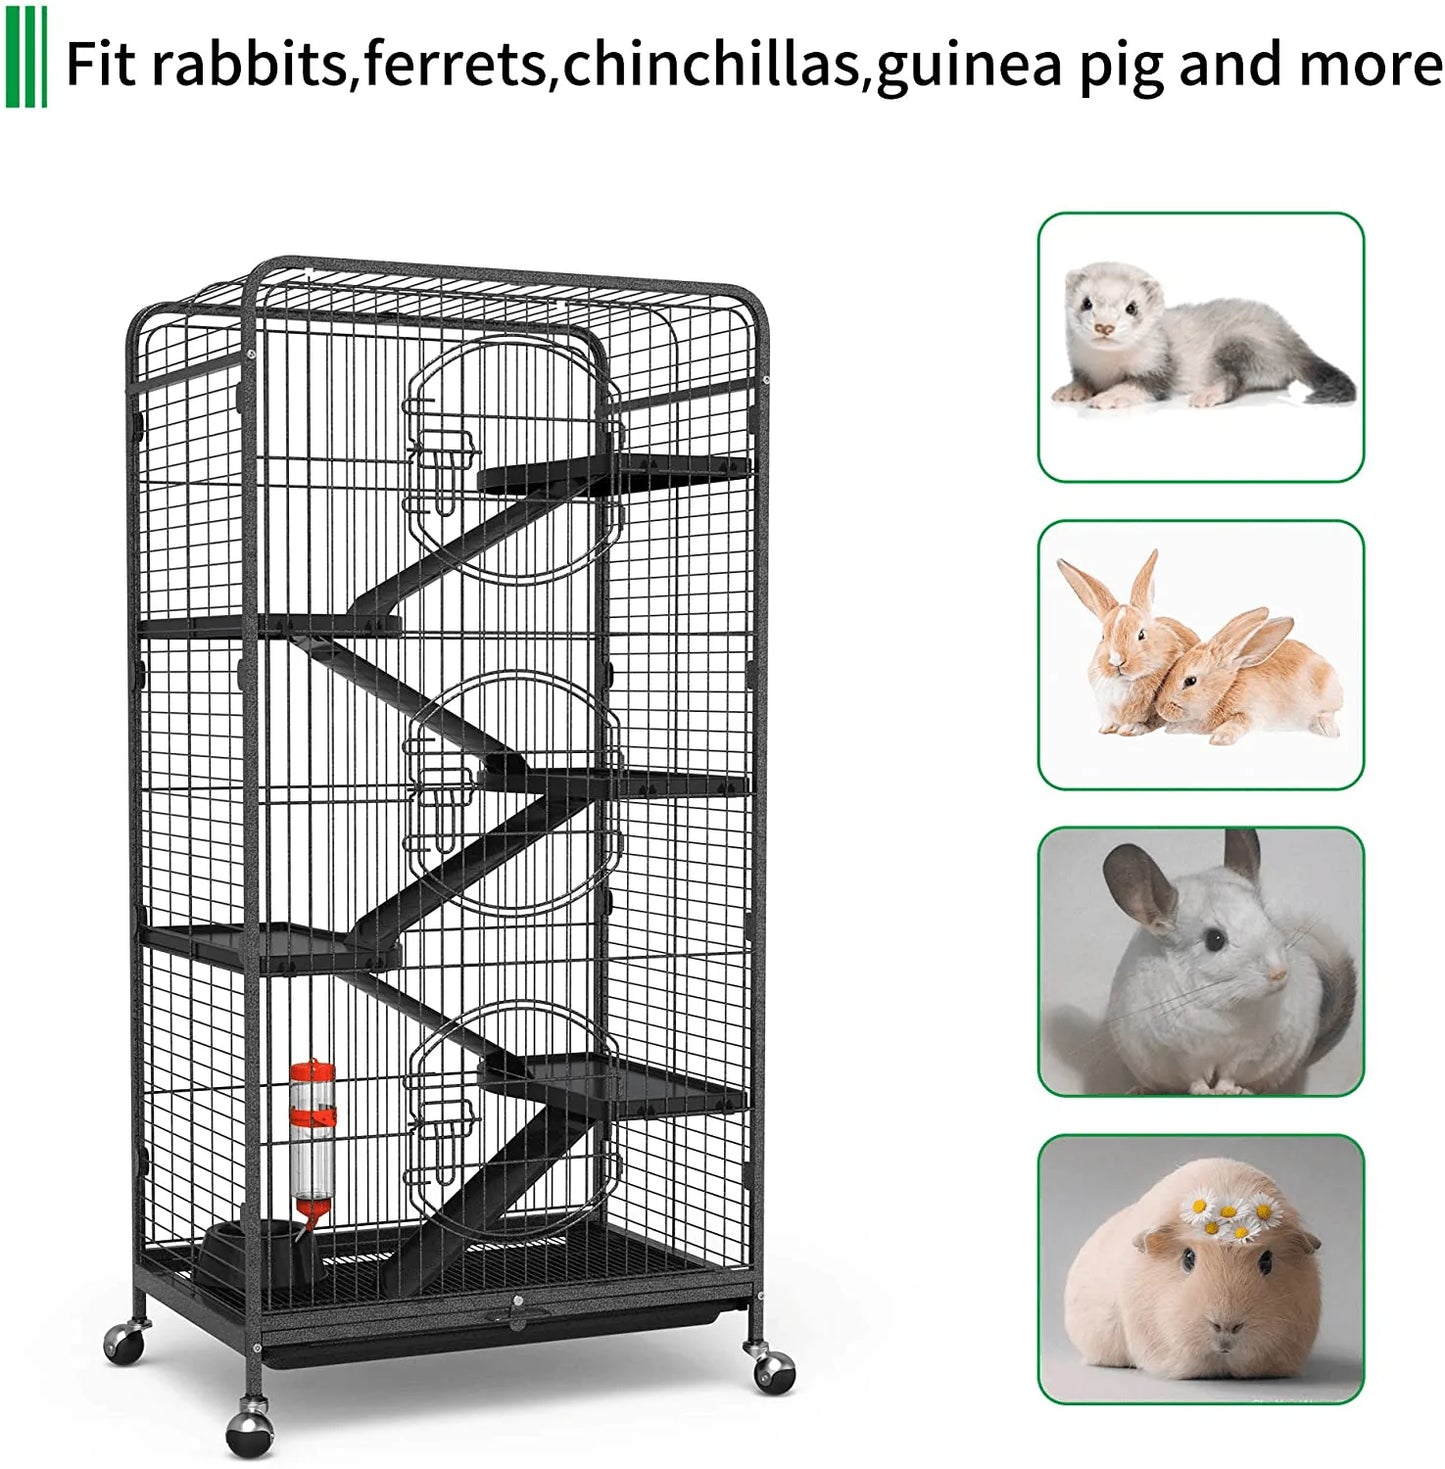 YINTATECH 52-Inch Metal Ferret Chinchilla Rat Cage Small Animal Cage with Rolling Stand Indoor Outdoor for Squirrel/ Guinea Pig/ Bunny/ Cat/ Sugar Glider/ Rabbit Animals & Pet Supplies > Pet Supplies > Small Animal Supplies > Small Animal Habitats & Cages YINTATECH   